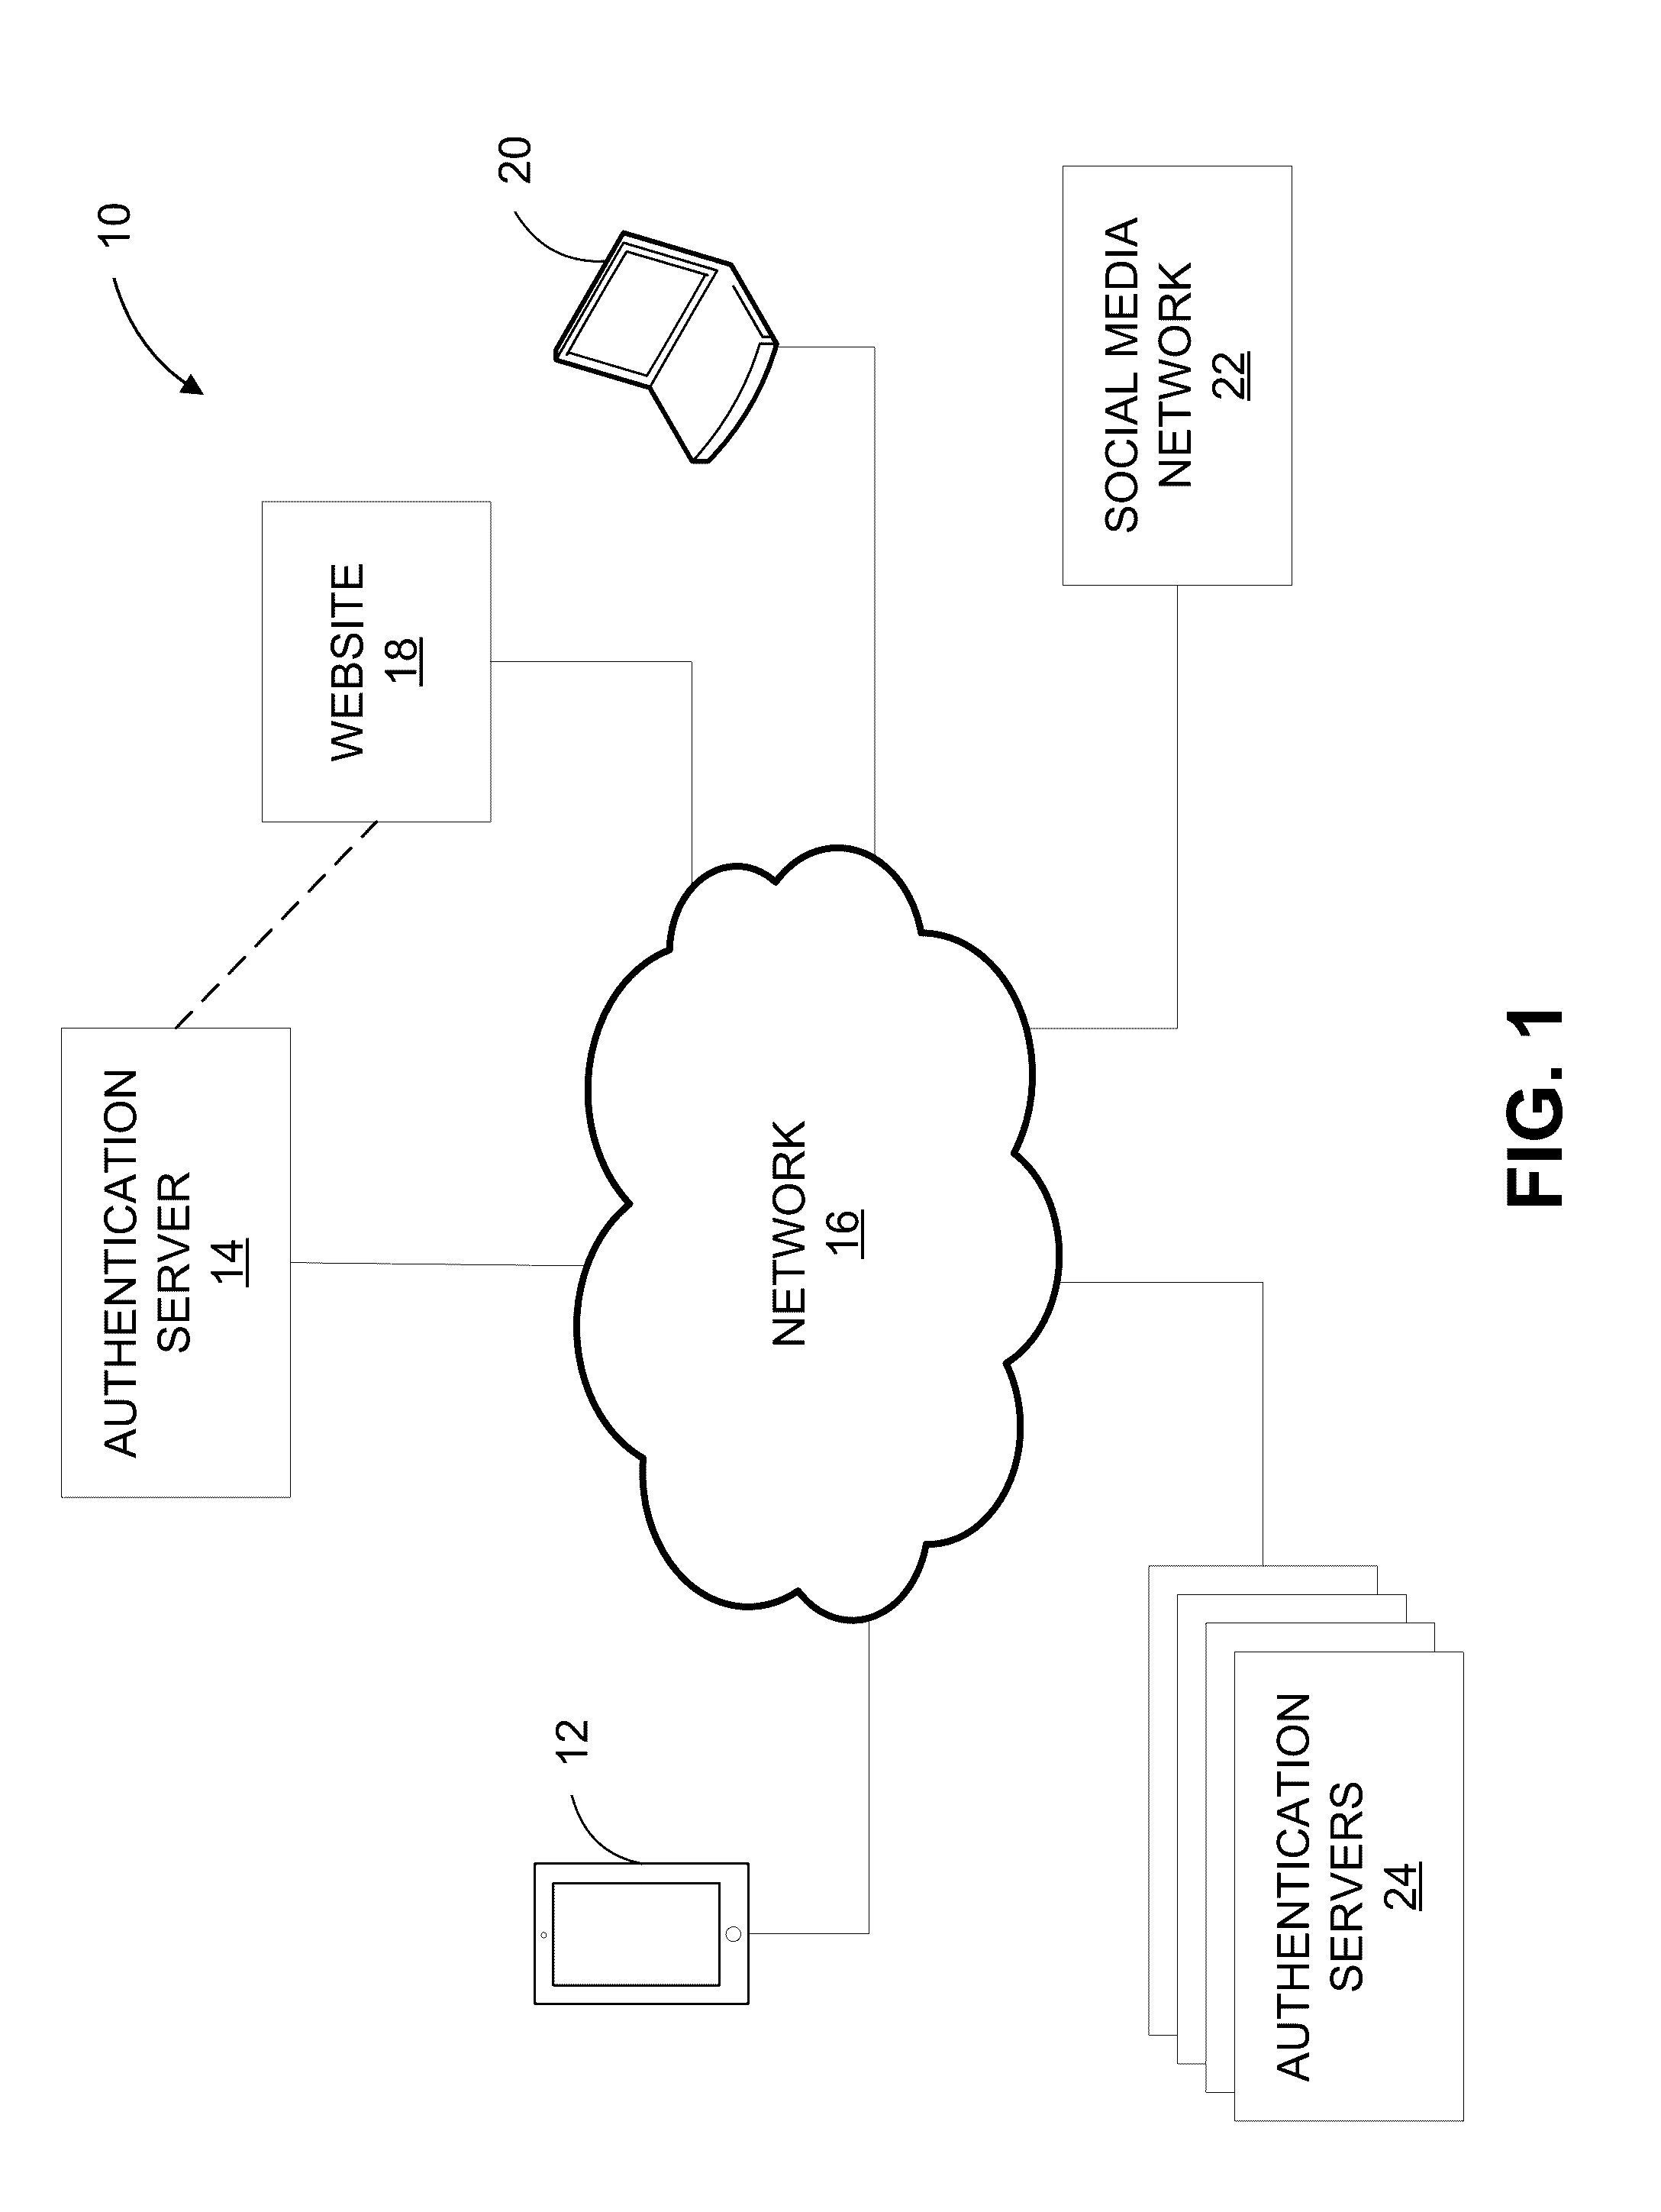 Systems and methods for authenticating photographic image data